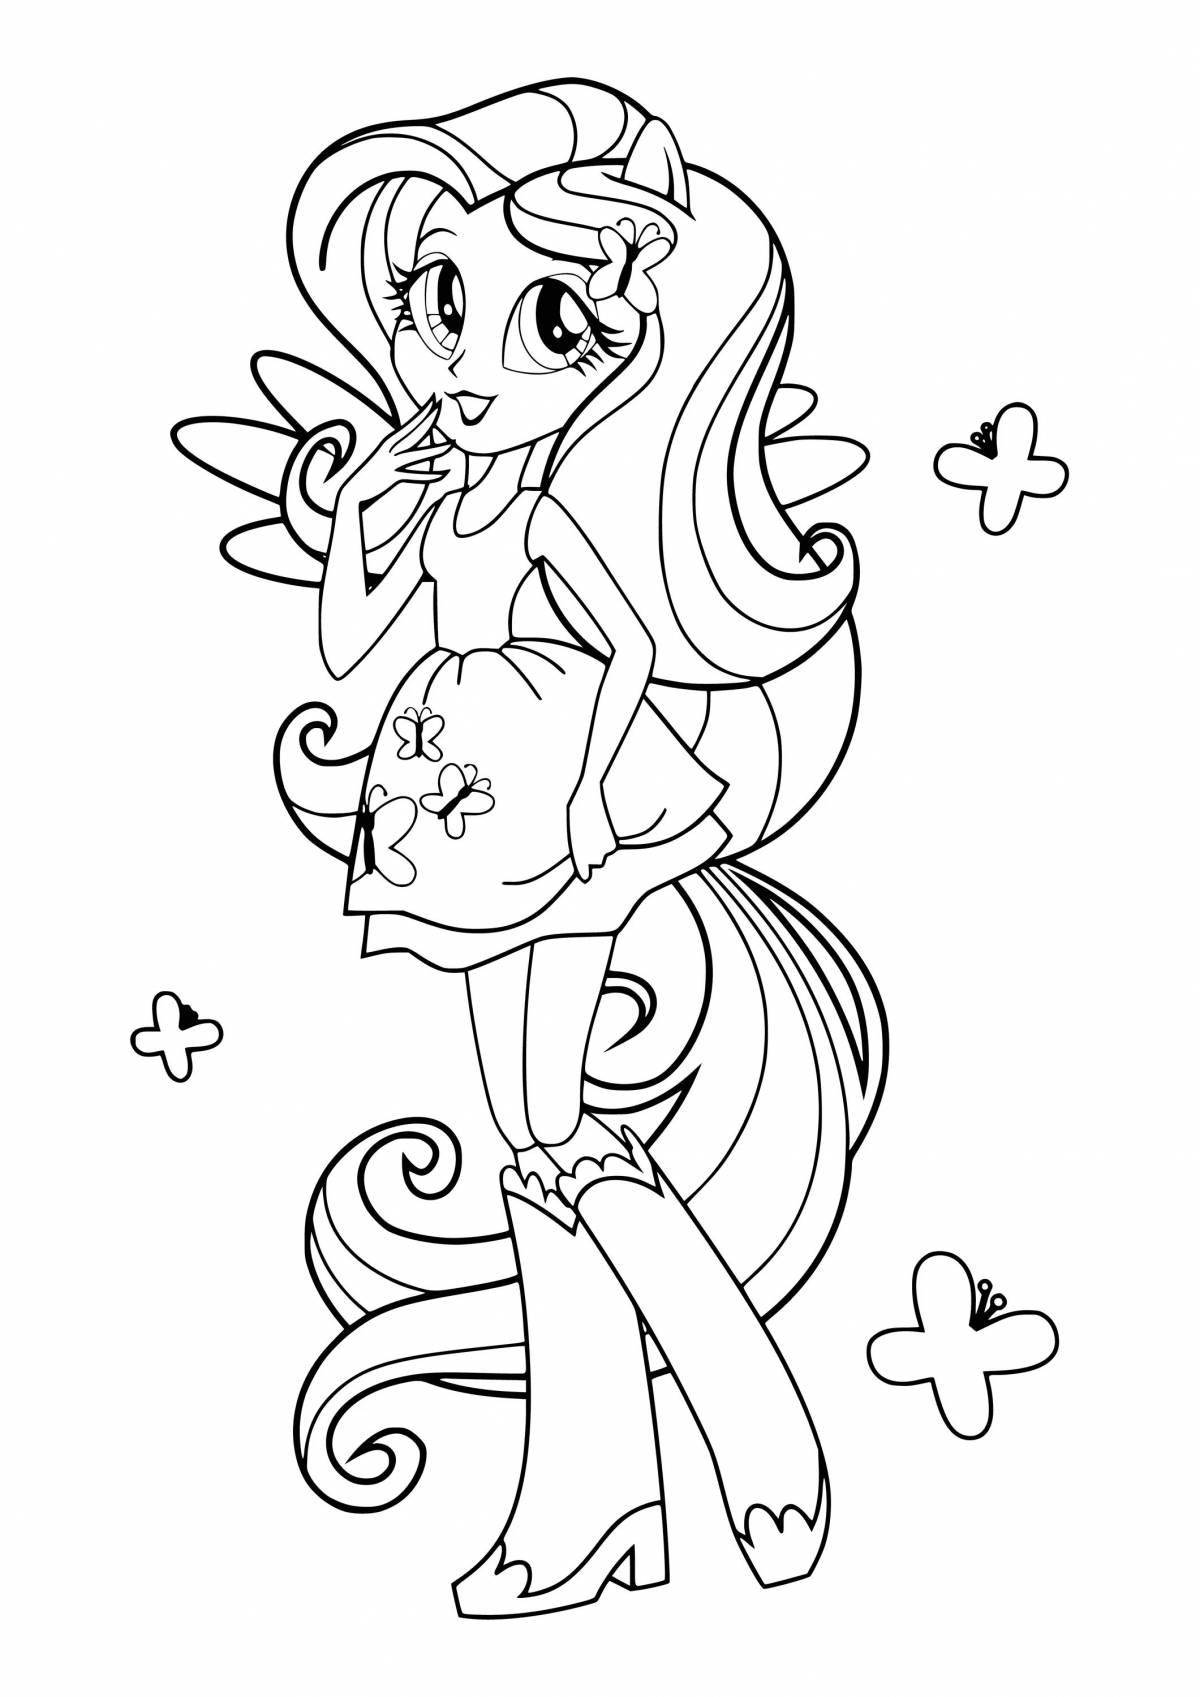 Charming fluttershy man coloring book